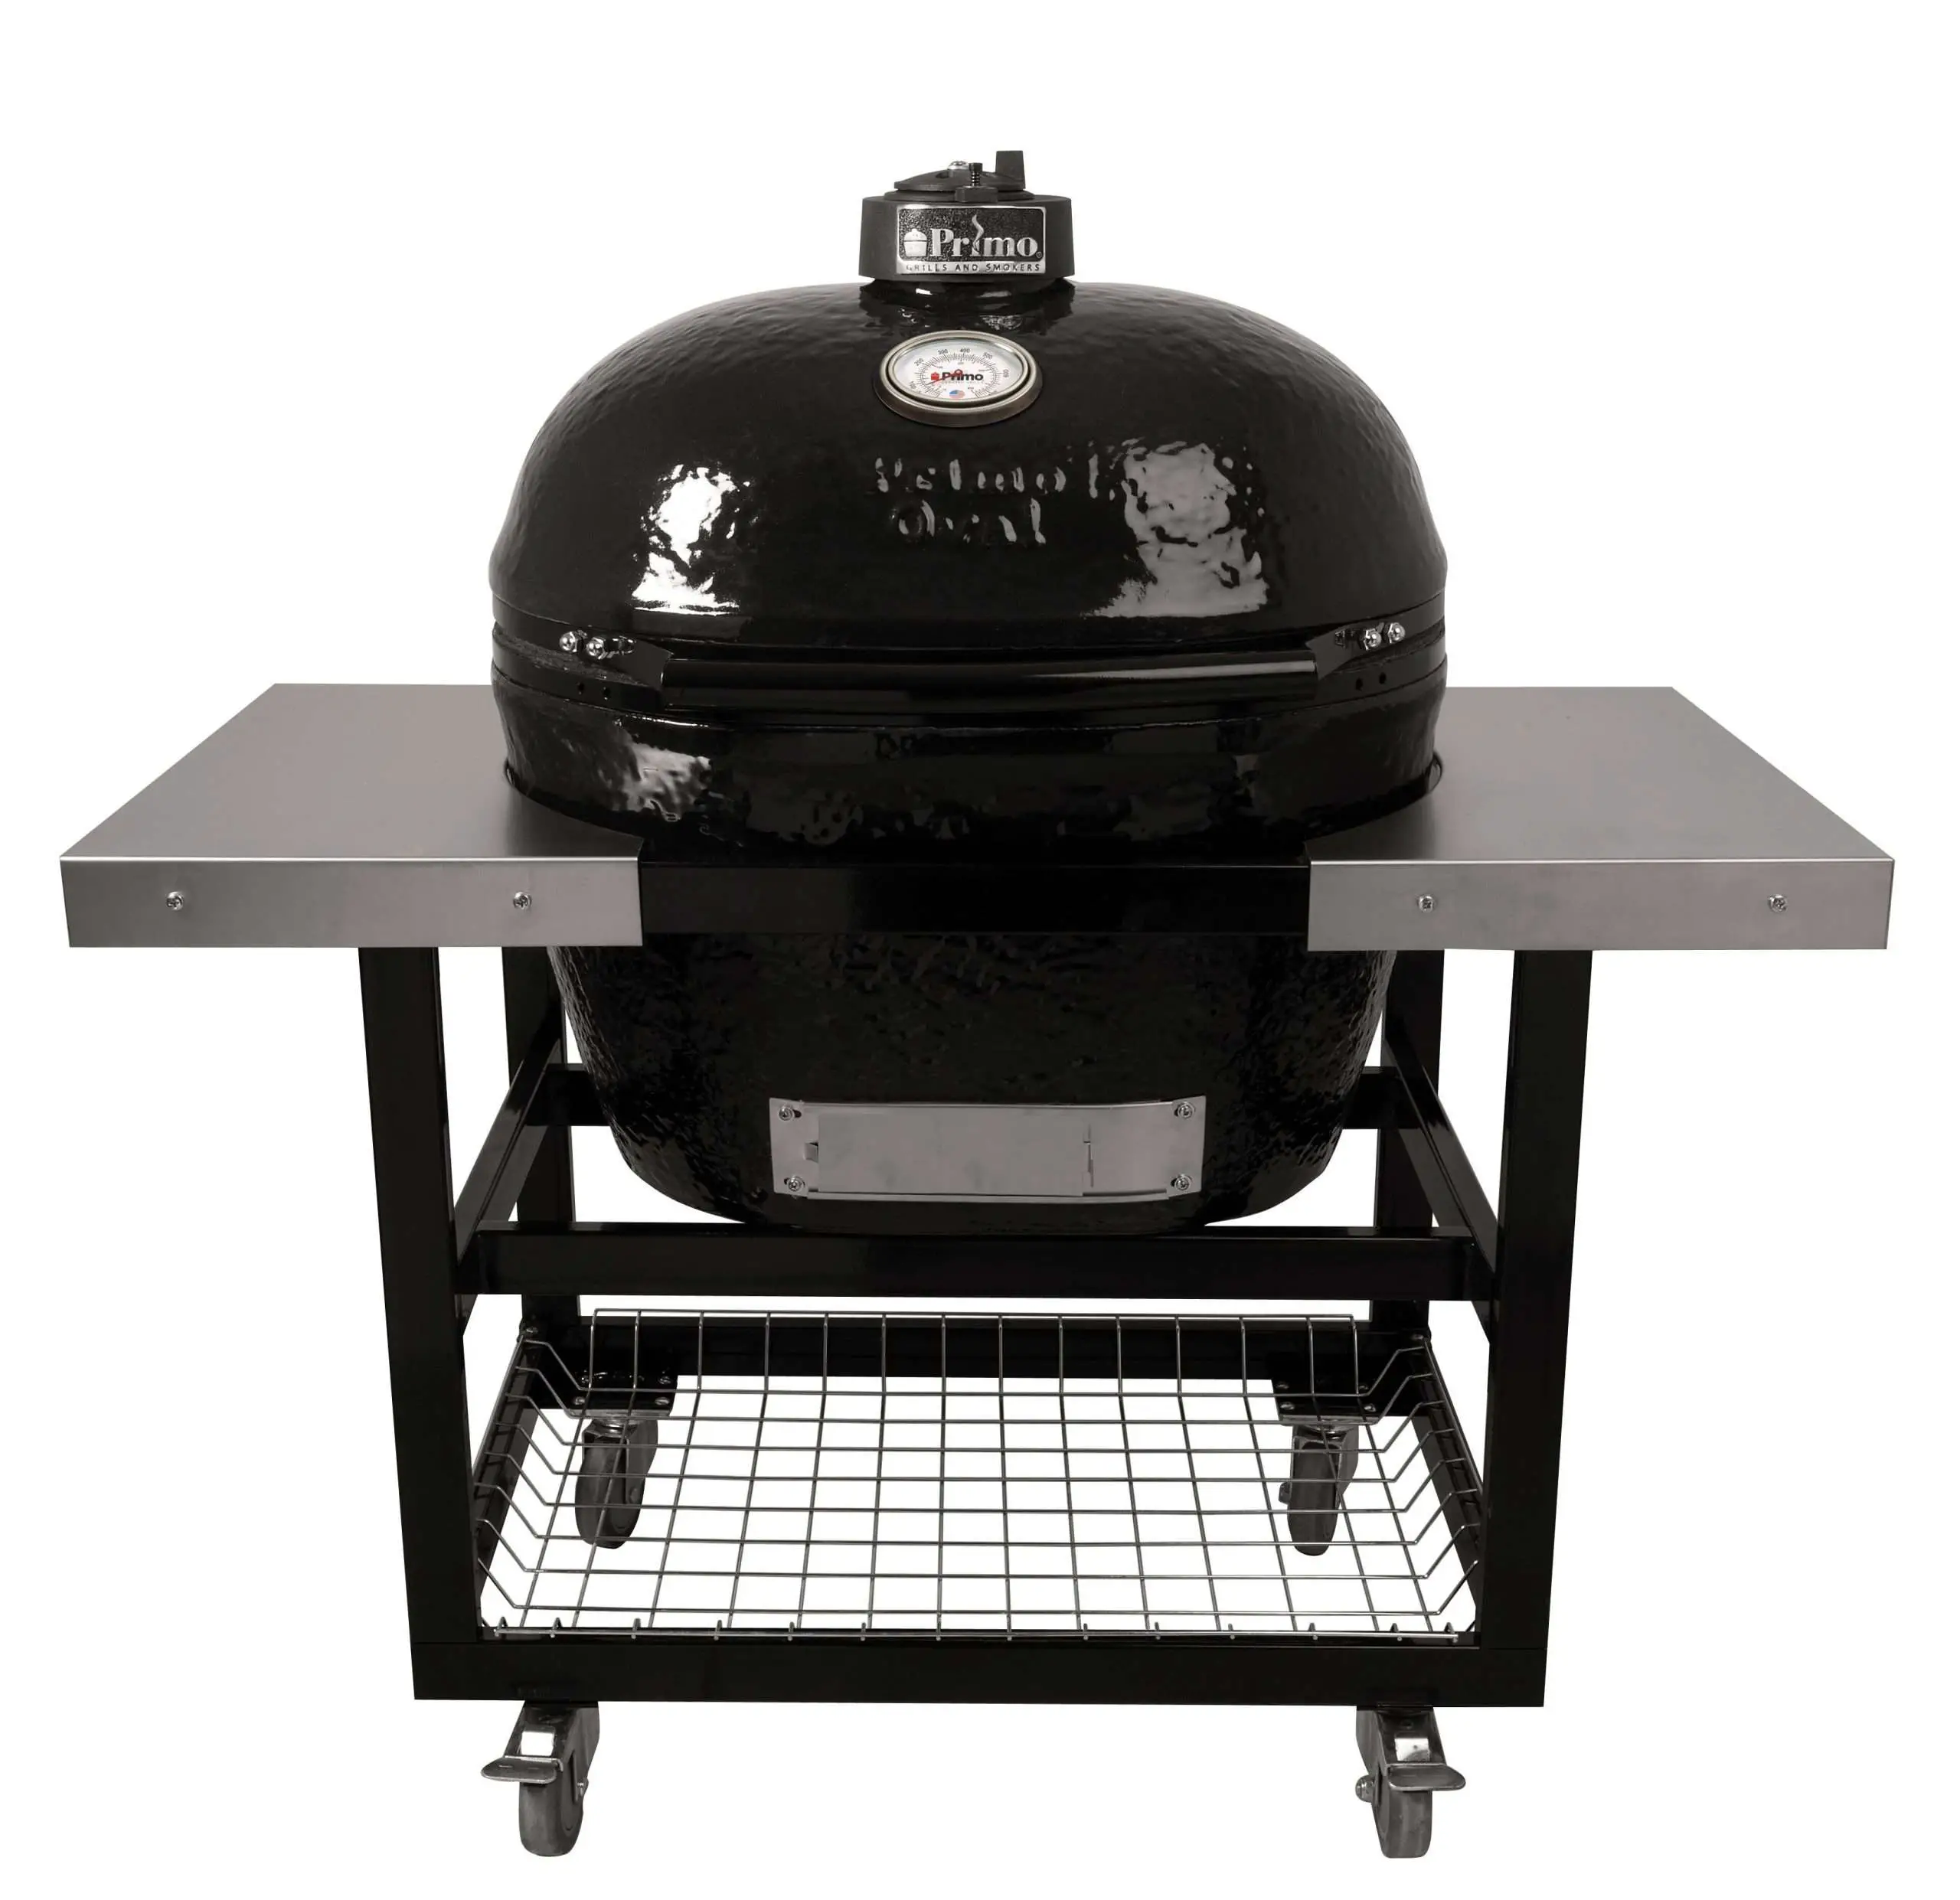 The Primo Oval ceramic #kamado grill and #smoker: This cooker is unique ...